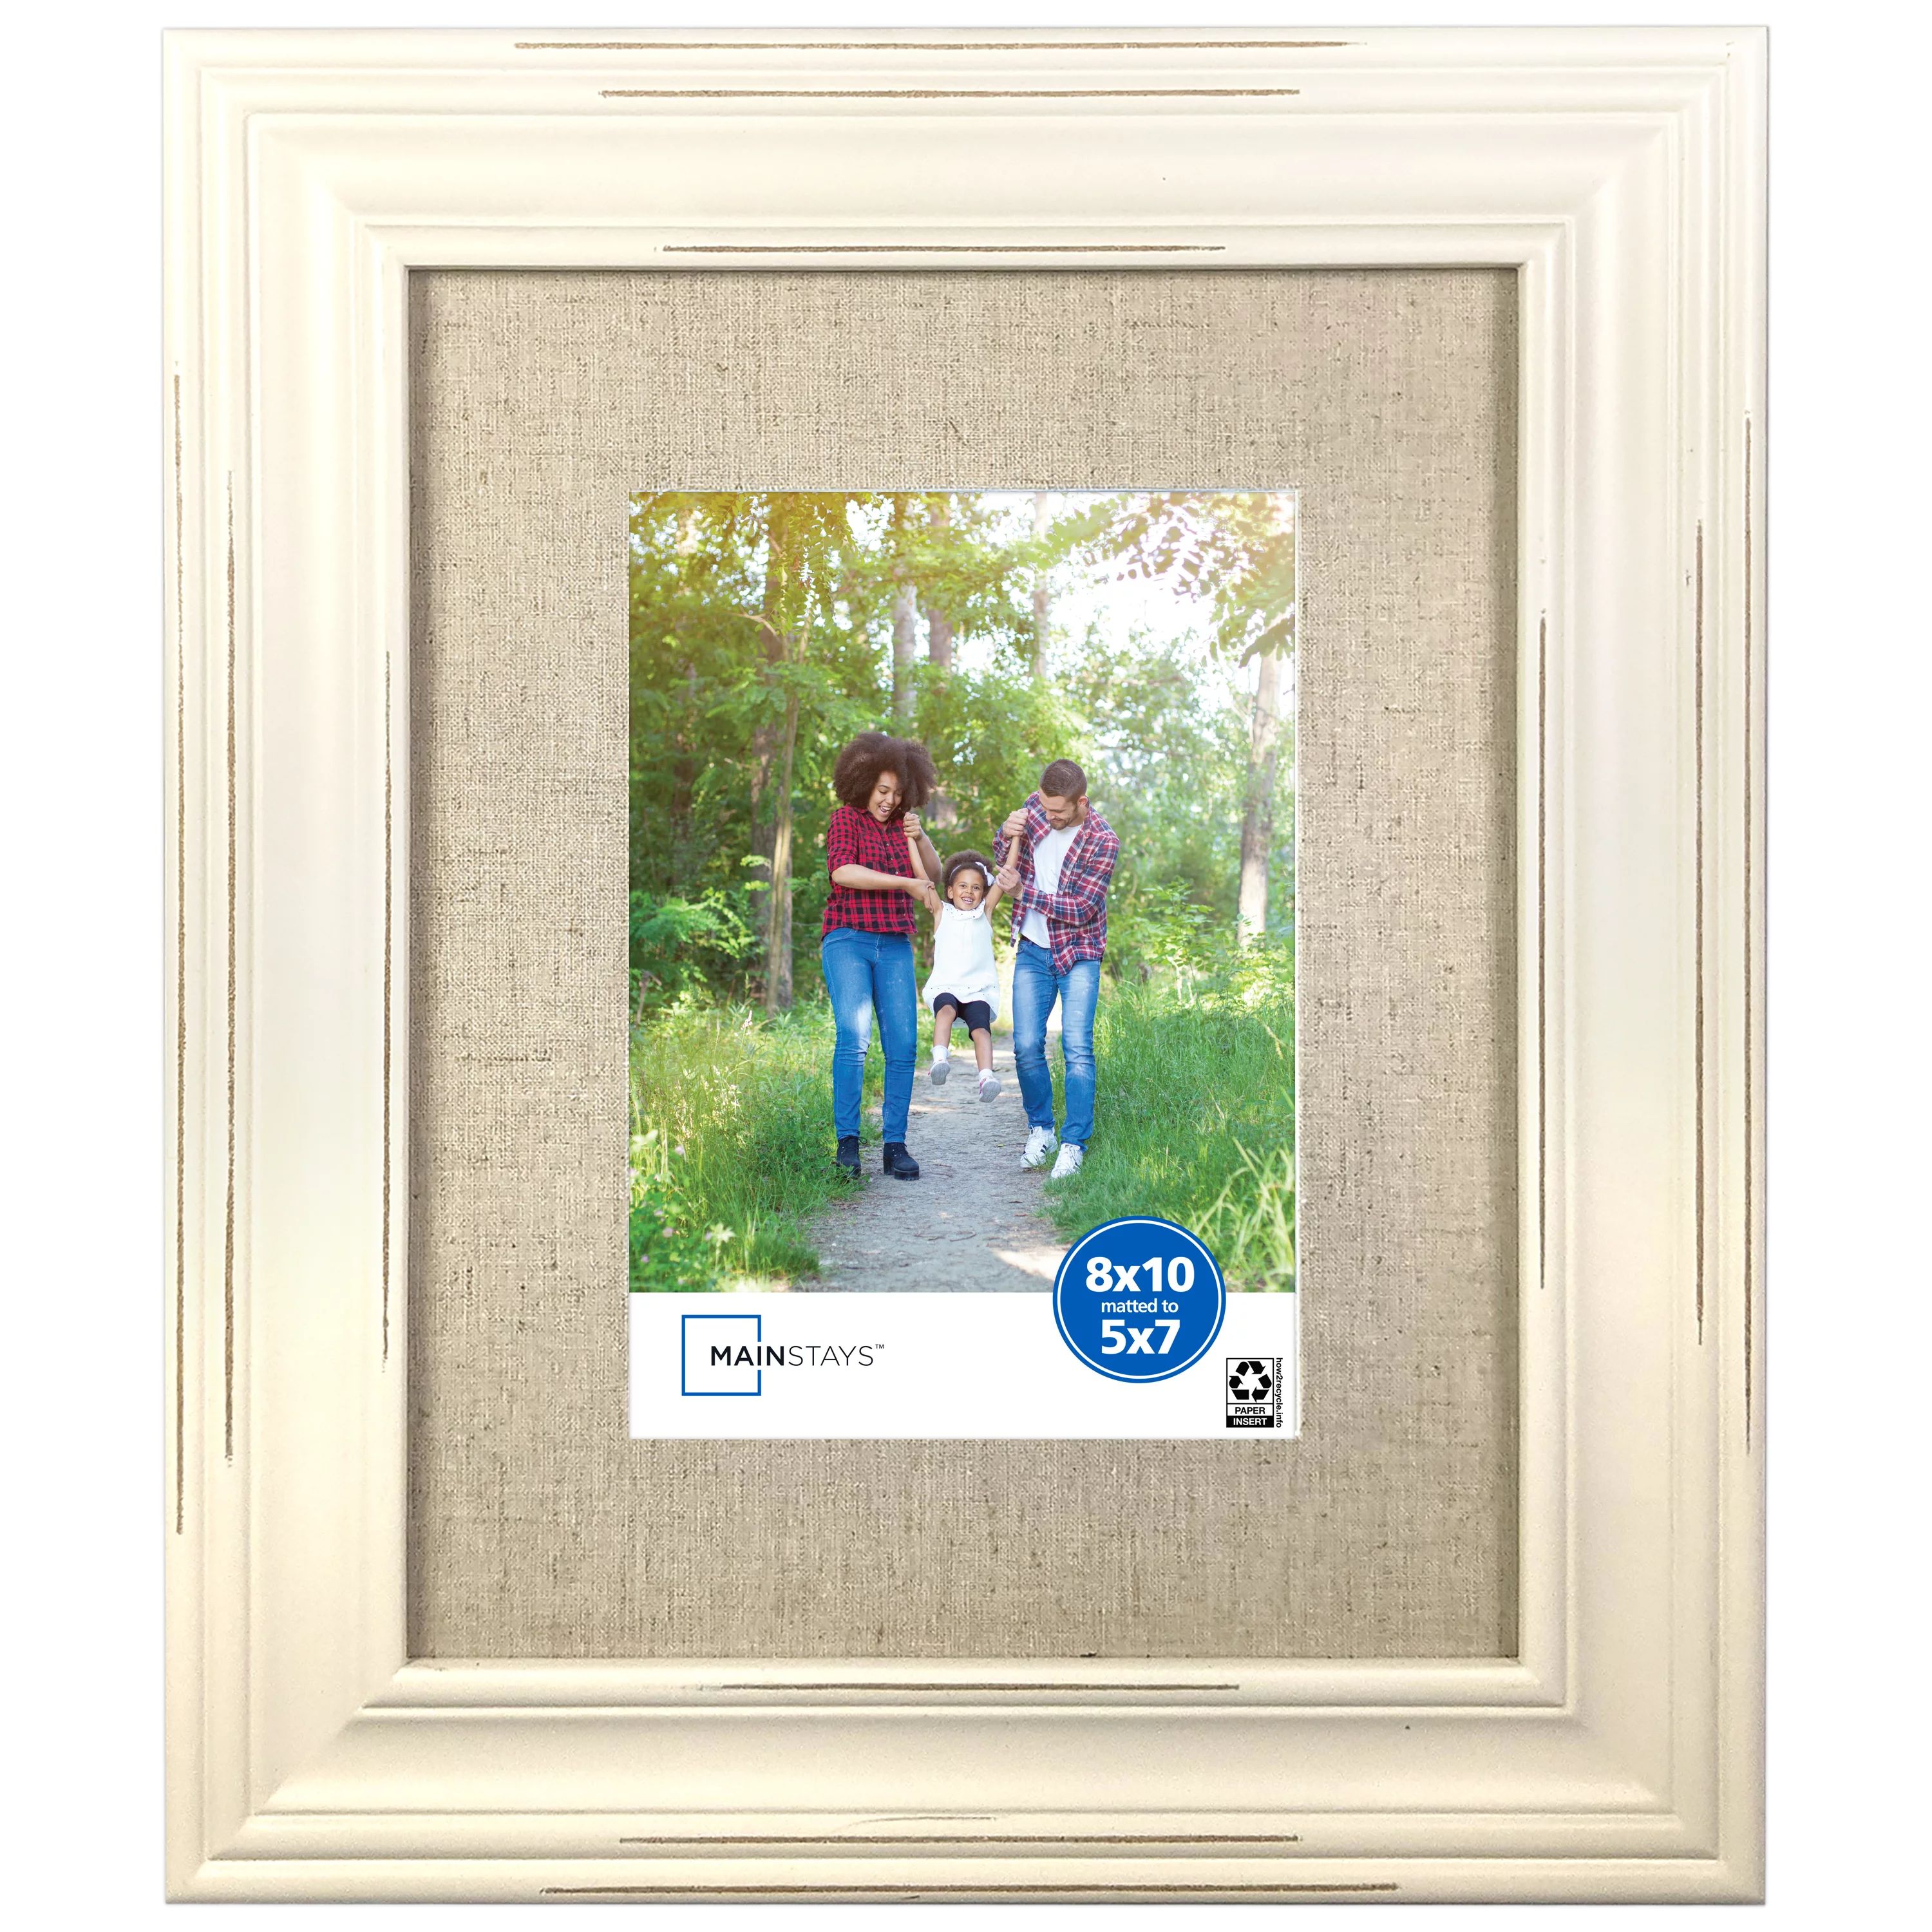 Mainstays 8” x 10” Matted to 5” x 7” White Distressed Picture Frame | Walmart (US)